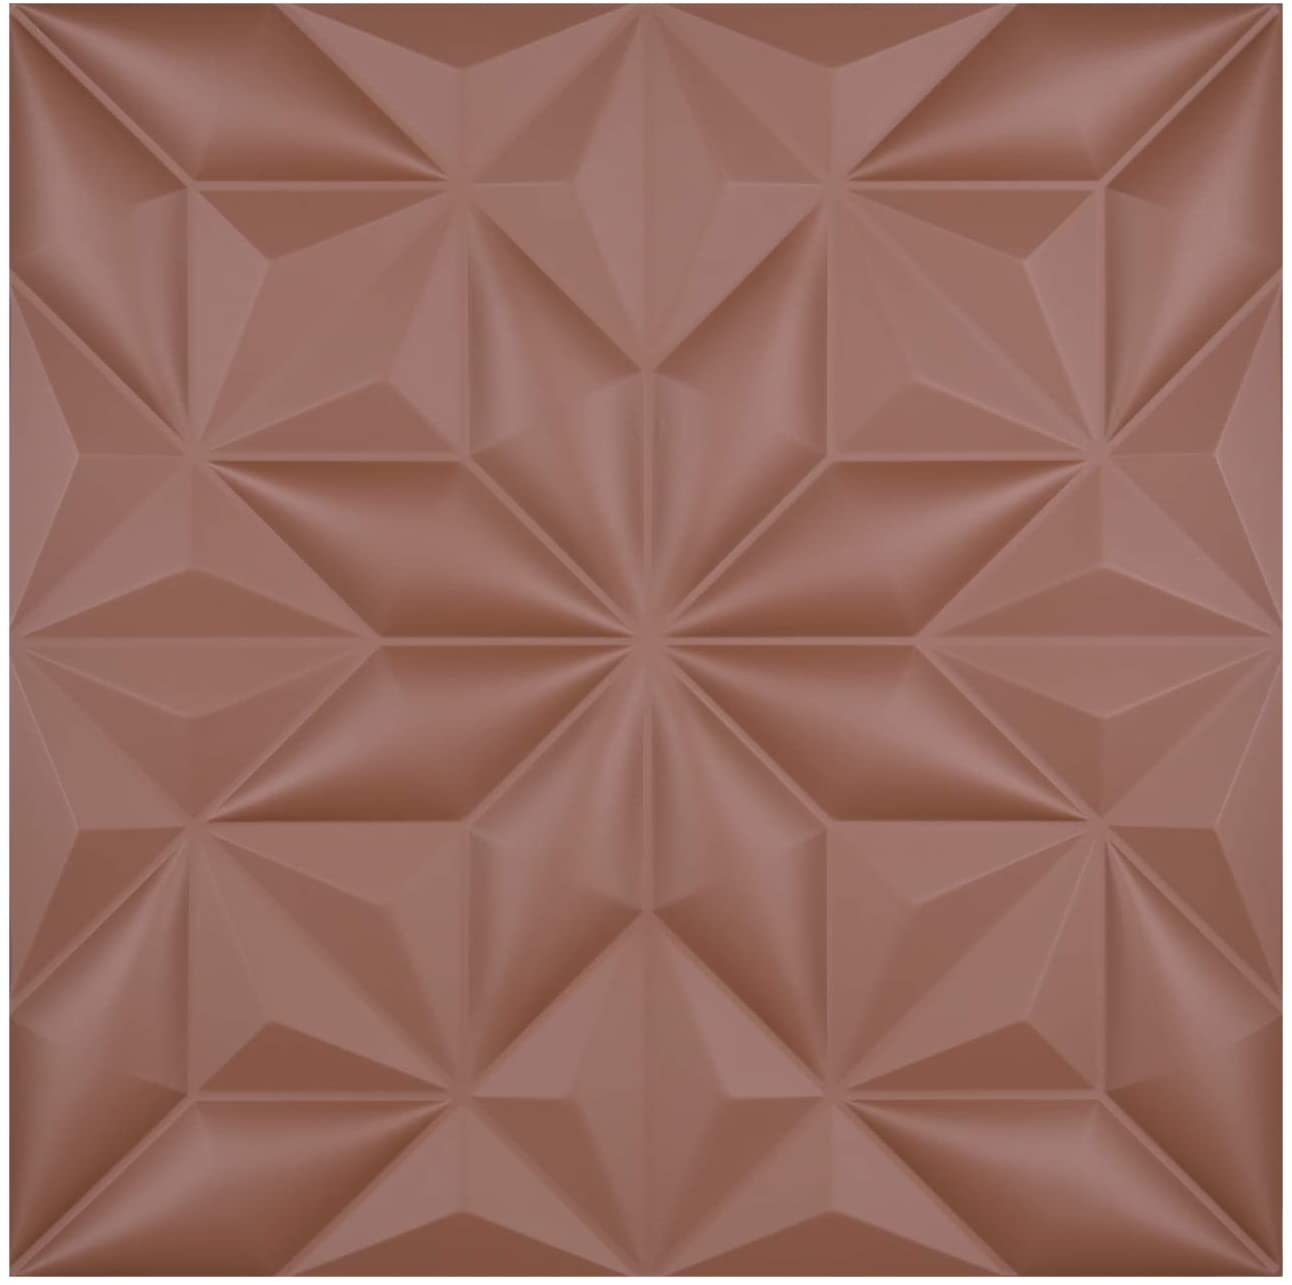 a12048-soft-leather-panel-Leather-Tiles-Decoartive-3D-Wall-Panels-Chocolate-Pyramid